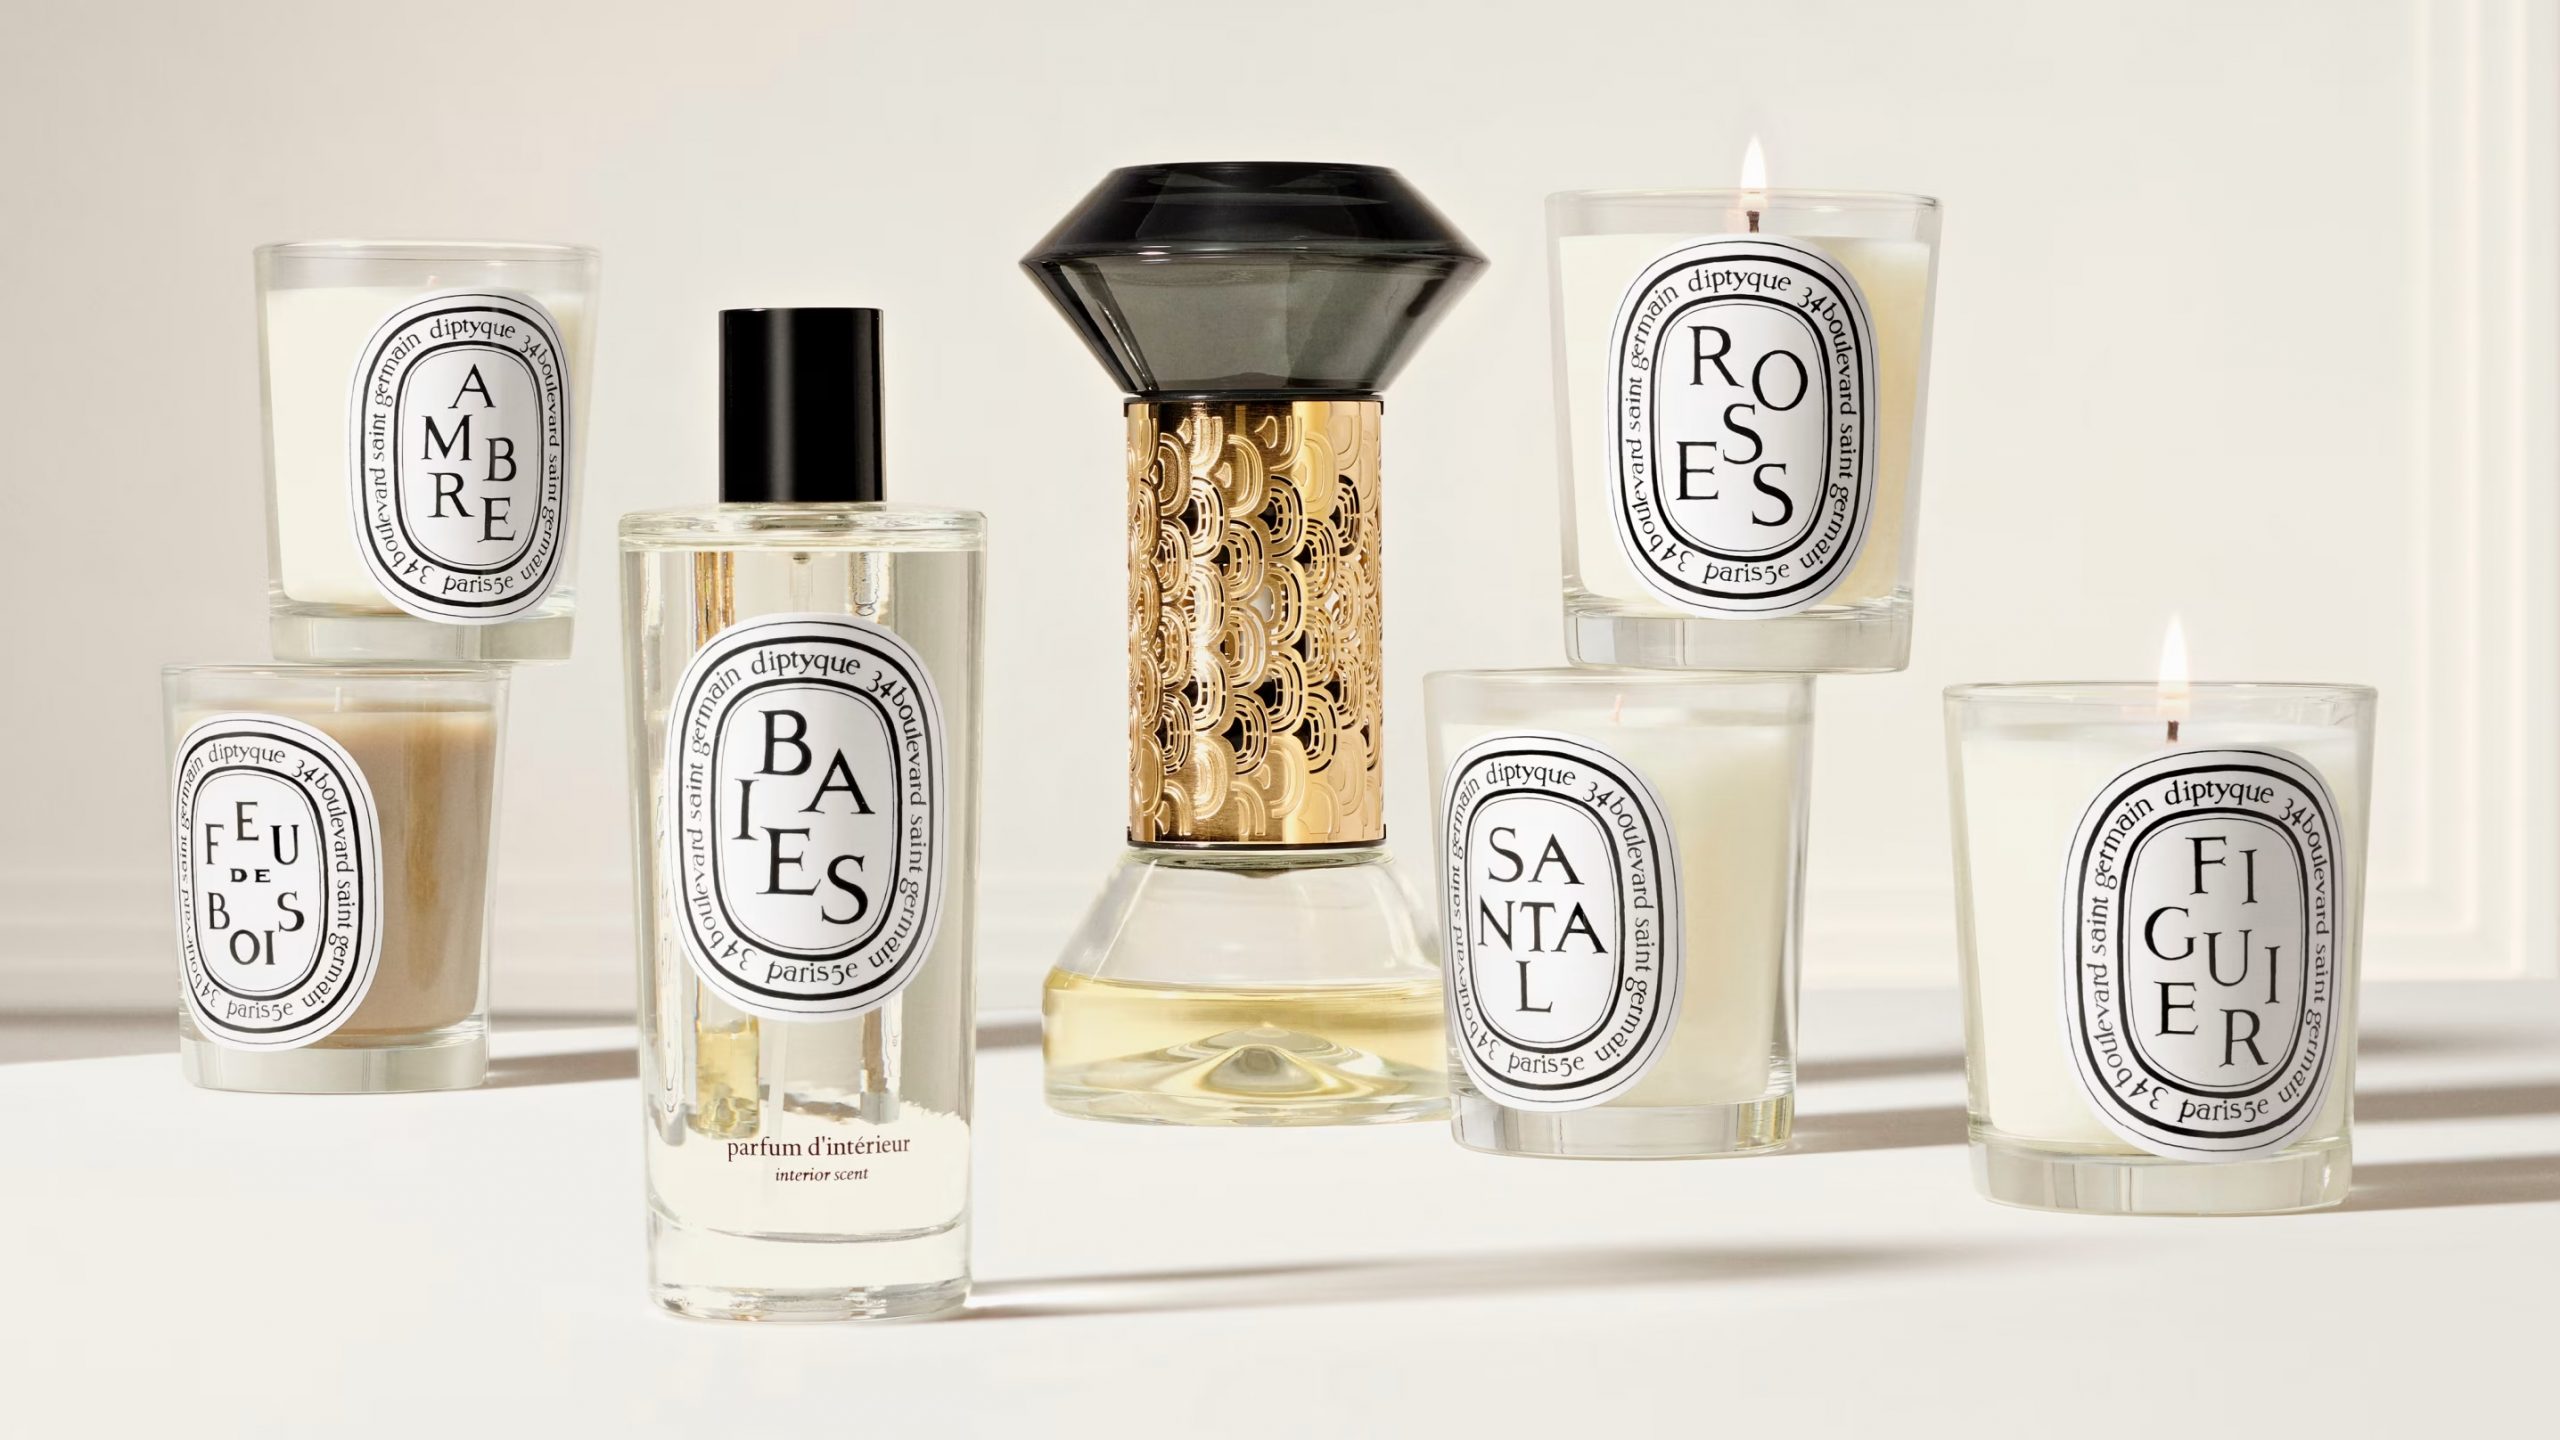 Diptyque’s Top 10 Candles: A Symphony of Scents and Scores!